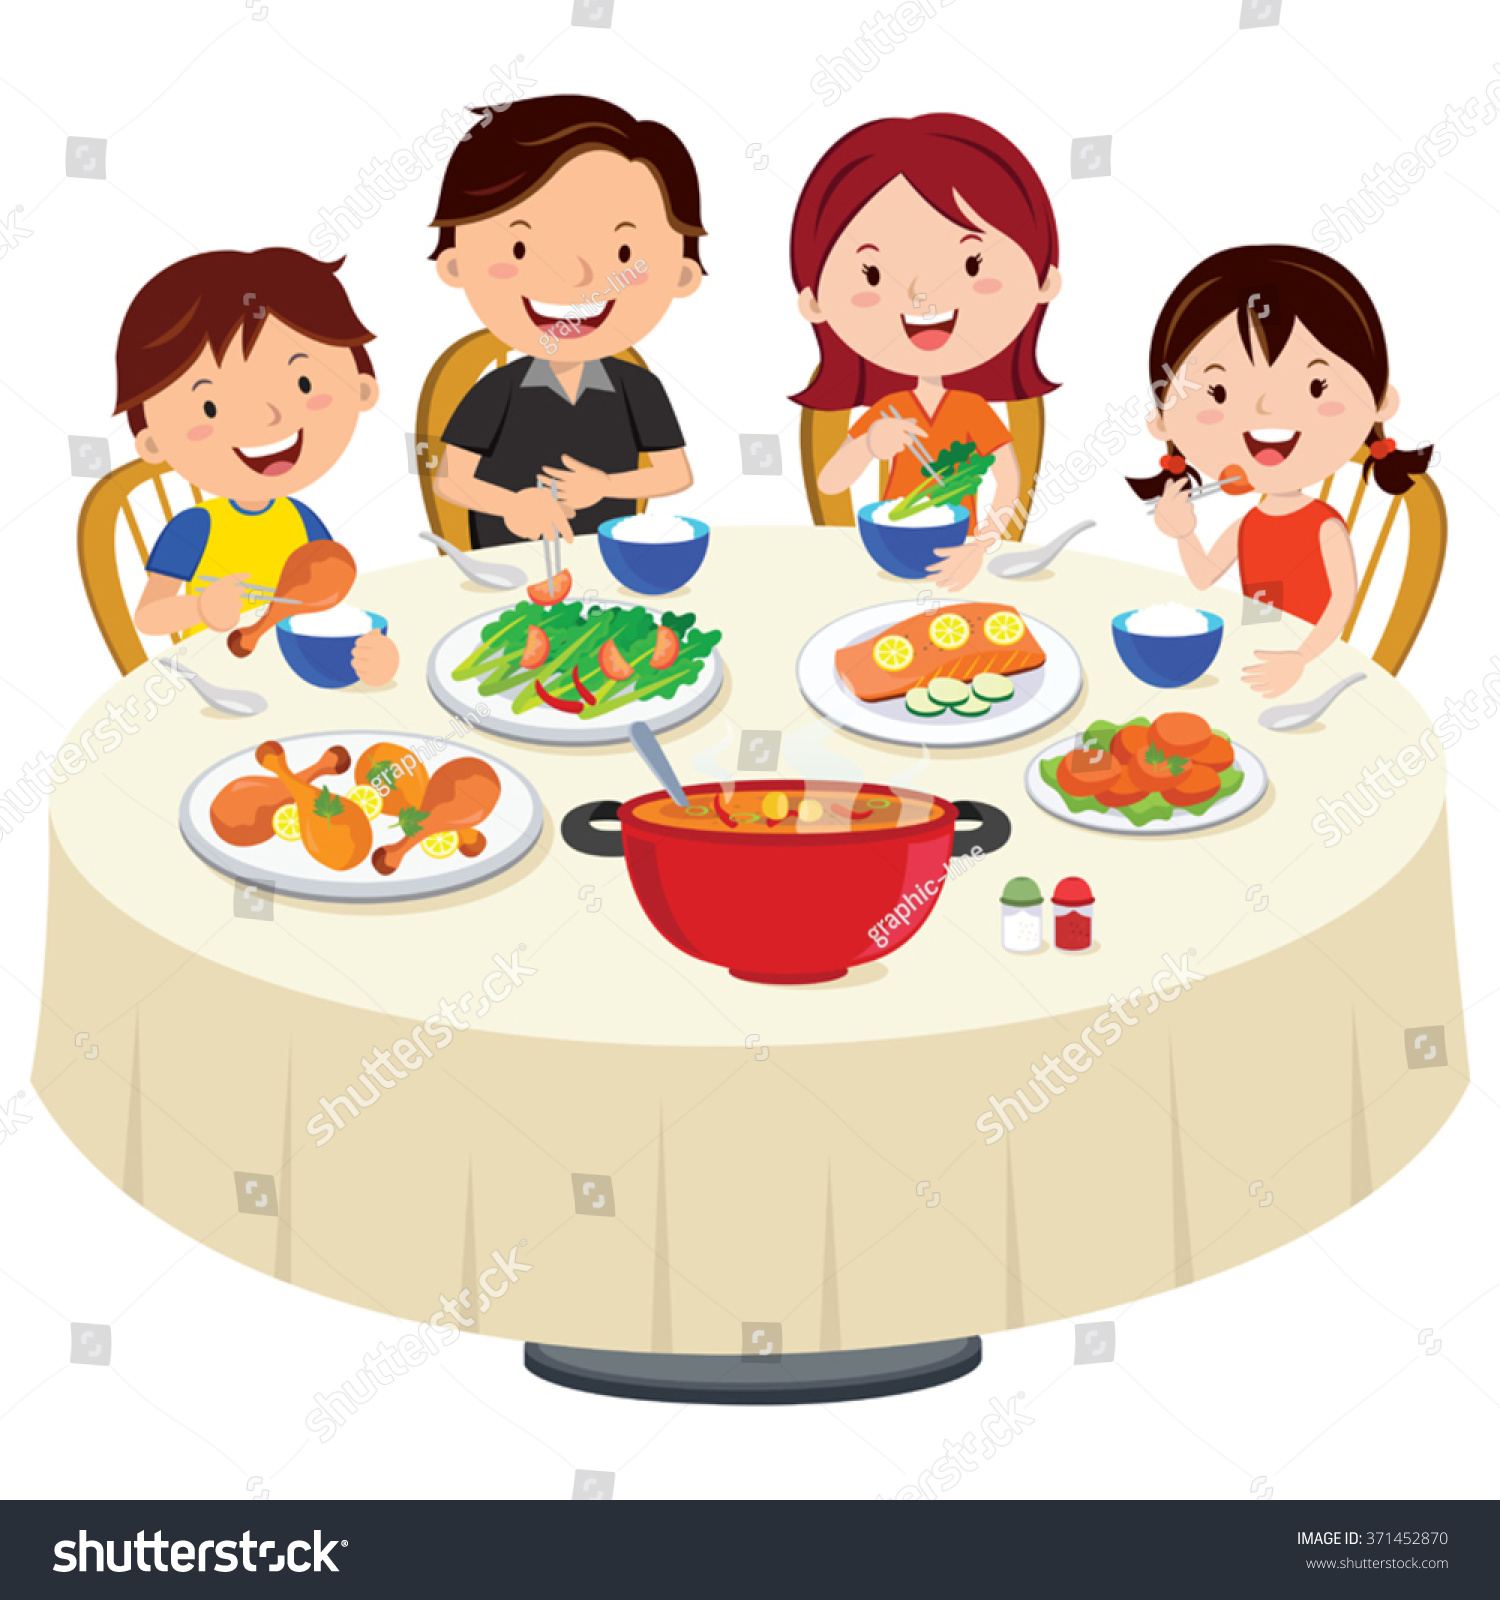 clipart eating in restaurant - photo #28